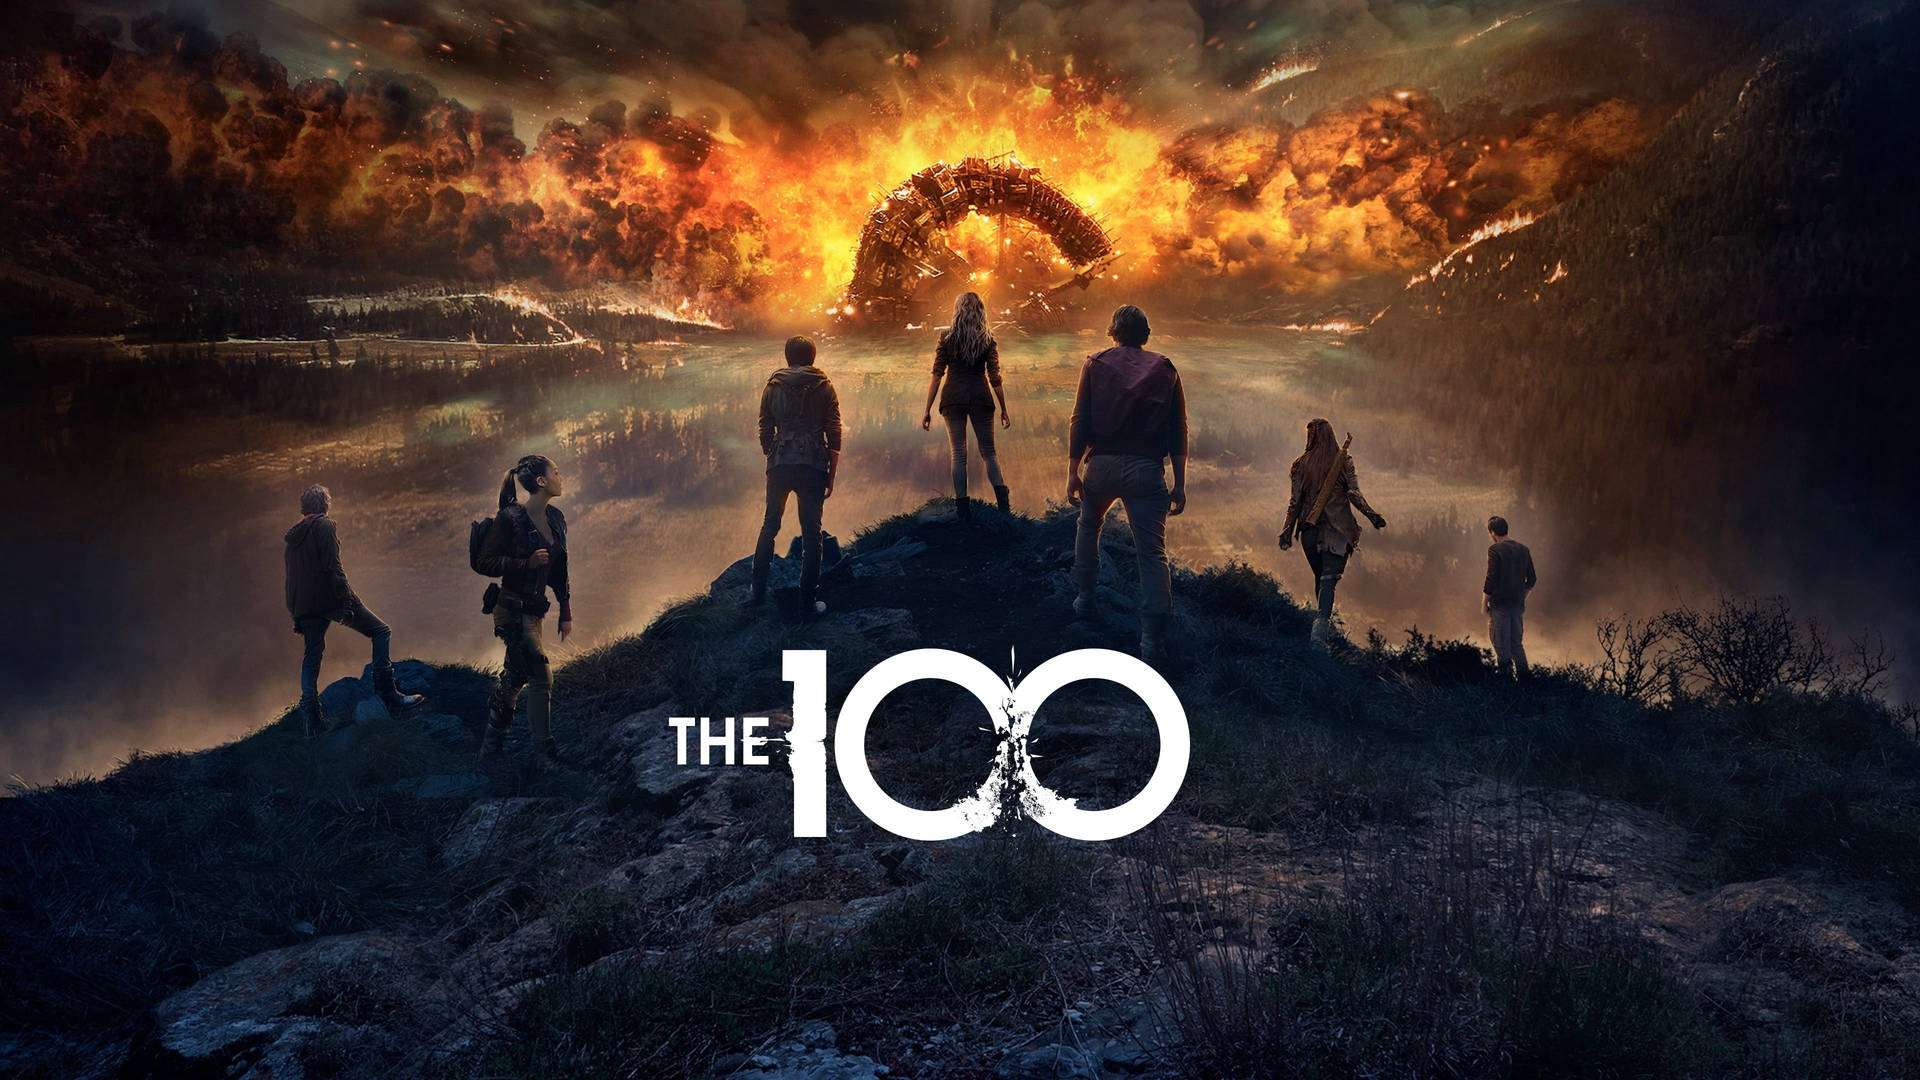 The 100 - Post-apocalyptic Science Fiction Television Series. Background